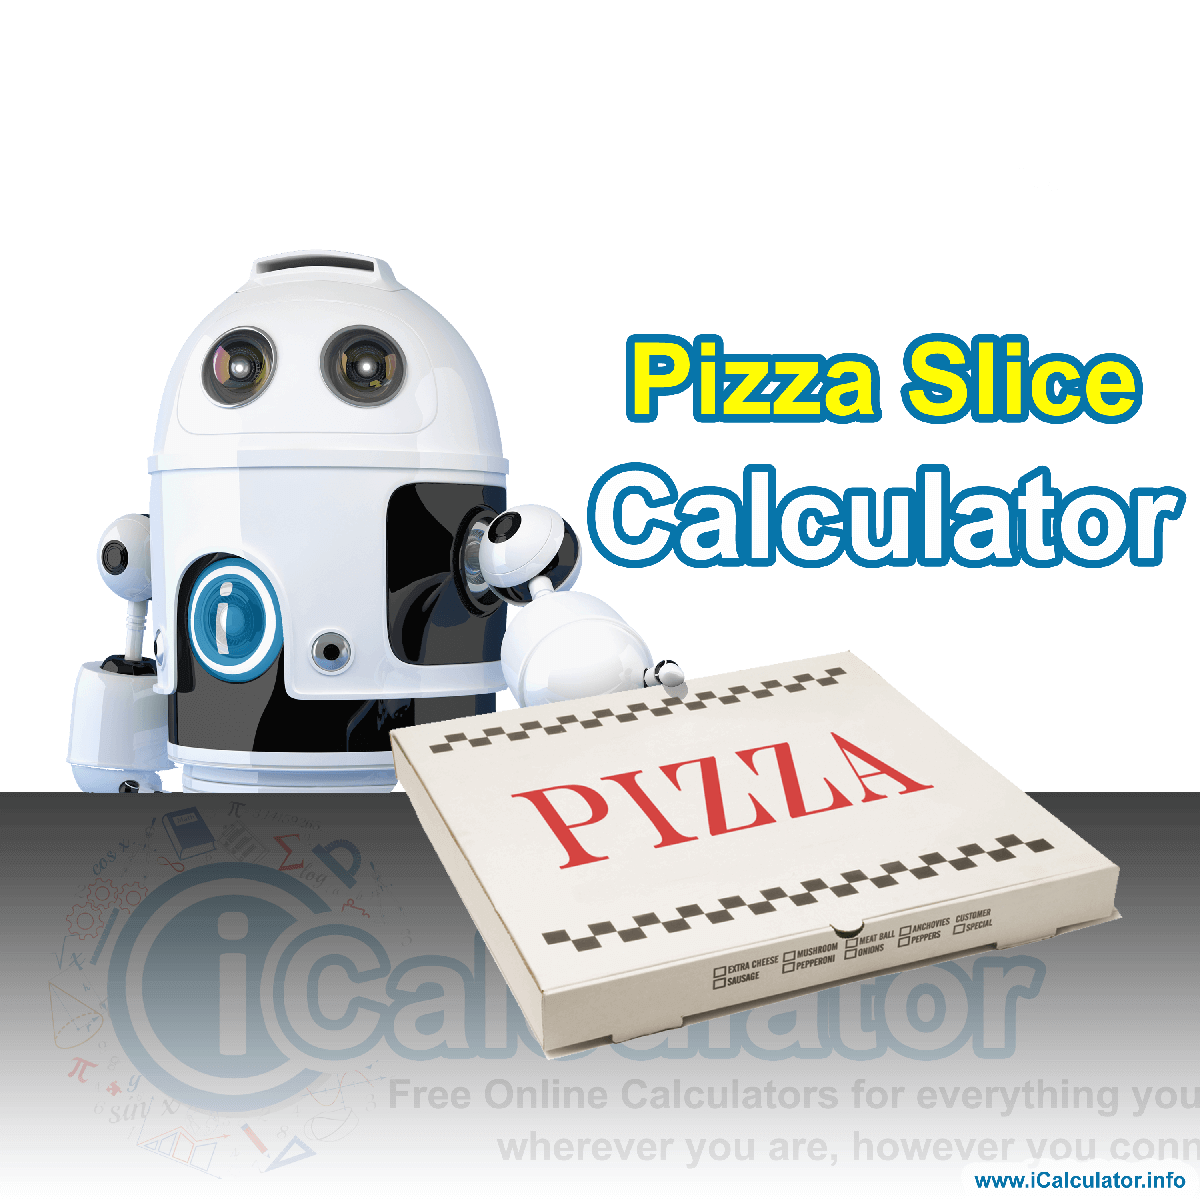 Pizza Calculator. This image shows our pizza delivery robot handing over a delicious large pizza which has been cut into slices after calculating the slices per pizza based on calorie count using the pizza slice forumal and the pizza calculator. 